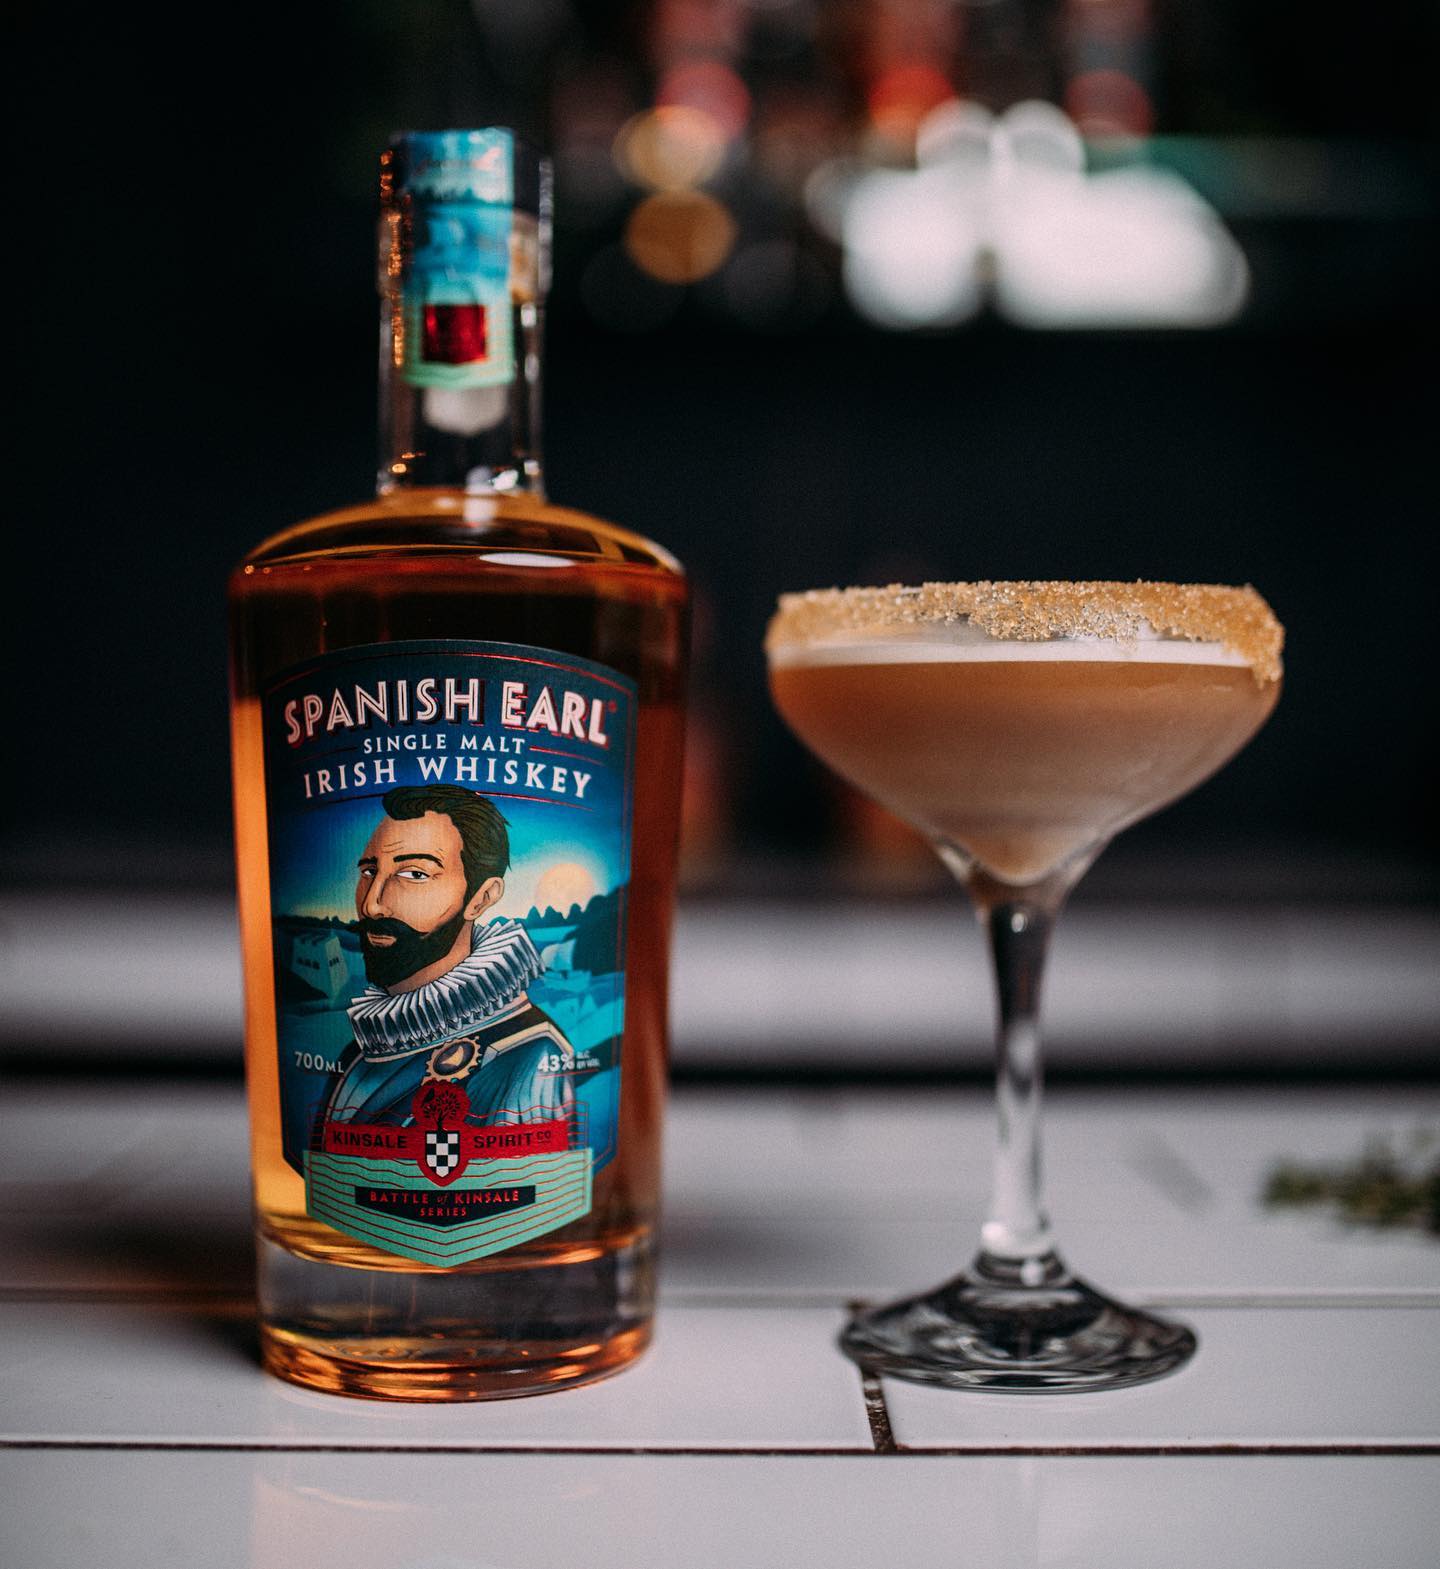 🥃 The Sweet Earl Cocktail. We can only describe this cocktail as a luscious and absolutely delicious dessert cocktail and a sure way to impress your friends and family who have a sweet tooth in 2022.

Ingredients: 
40ml Spanish Earl Whiskey
60ml Almond/banana mix
15ml Coffee liqueur
2 x dashes of chocolate bitters

Process: Add and Stir the above ingredients into a boston glass filled with Ice and shake. 

Served: Strain mixture through a sieve into a cocktail glass.

Garnish: Biscuit rim

📲 Learn more of our recipes at www.kinsalespirit.com.

🖤 @anneg9521 

#drinkresponsibly 
#spanishearlwhiskey #whiskey #thesweetearl #cocktail #tasty #sweet #singlemalt #irishwhiskey #whiskeycocktail #cocktails #kinsalespiritco